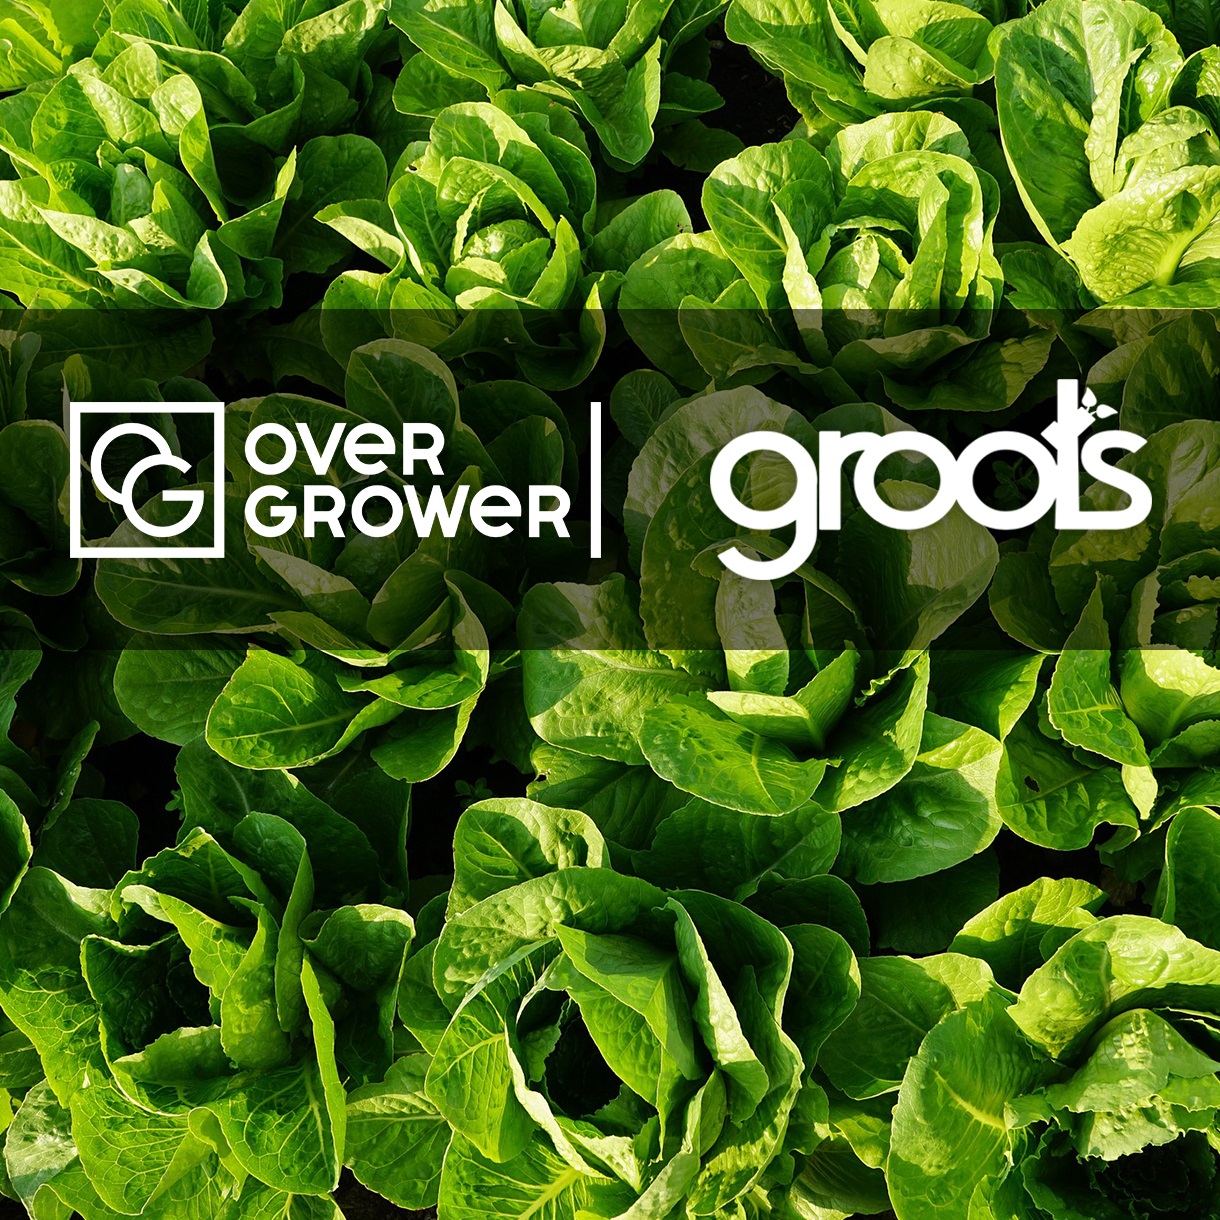 The Partnership Agreement with Groots Hydroponics  executed!